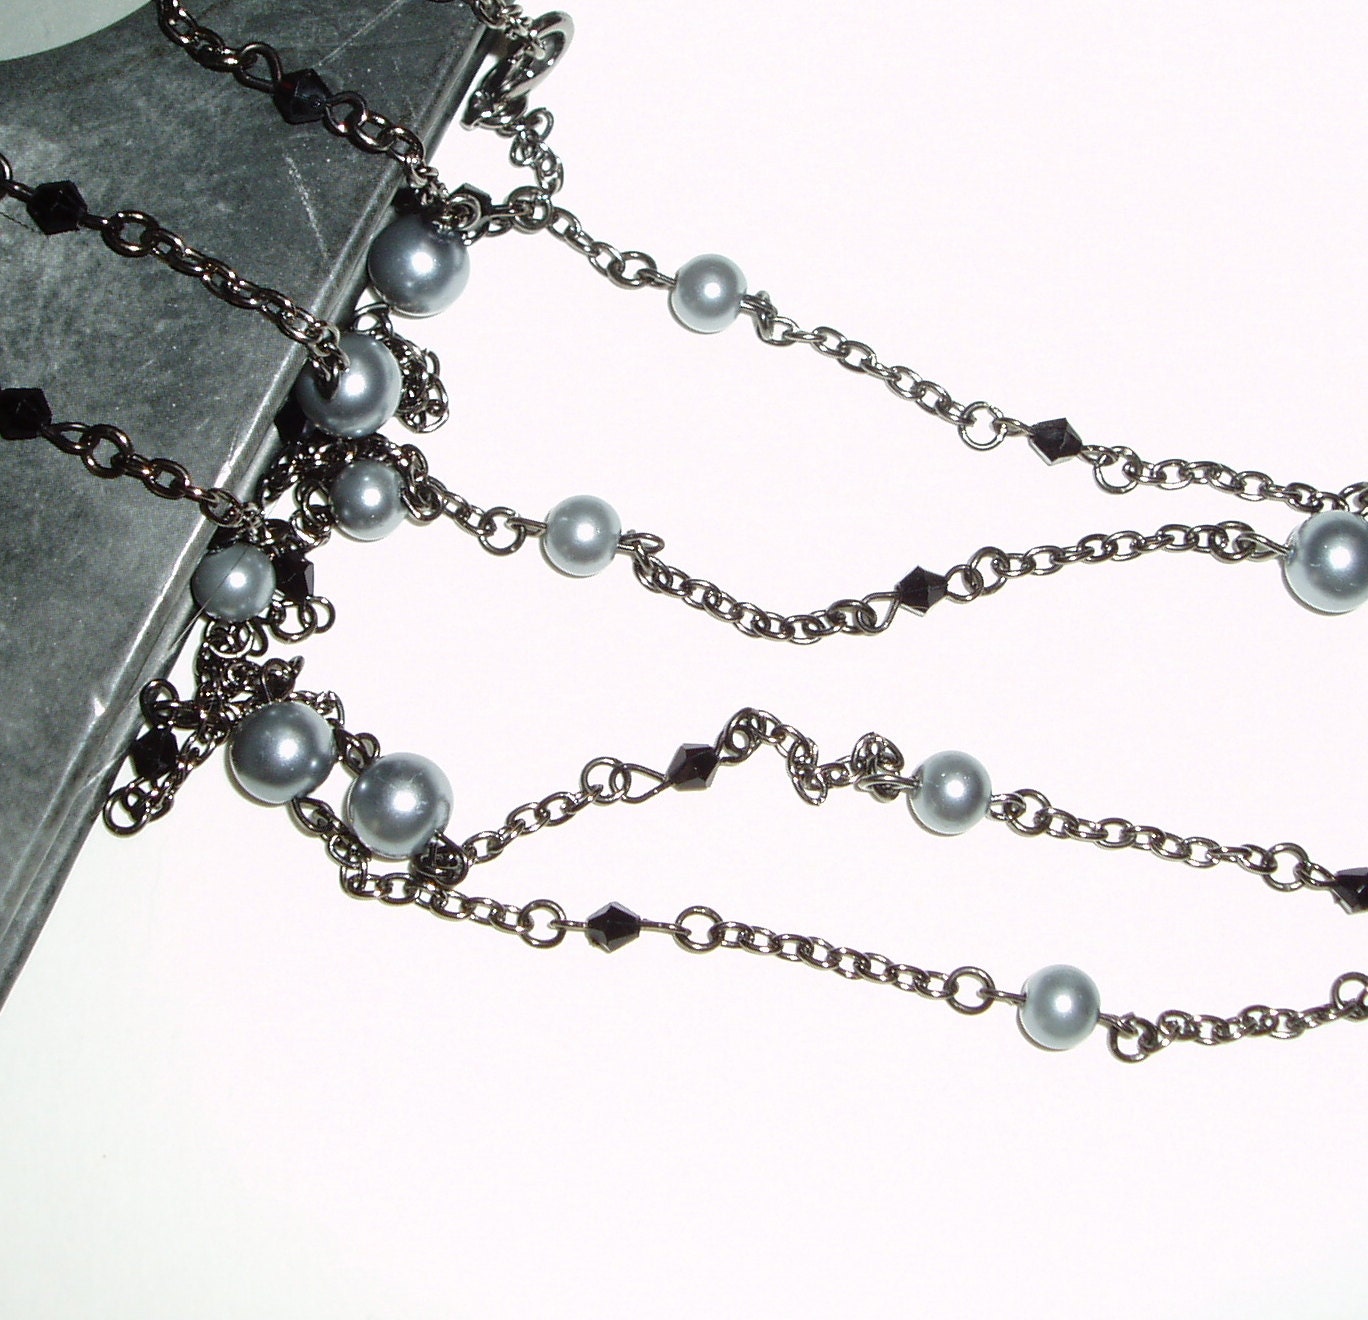 Long Gray and Black Necklace - Double Strand Gray and Black Beaded Necklace on Gunmetal Chain - ChathamsCrossing